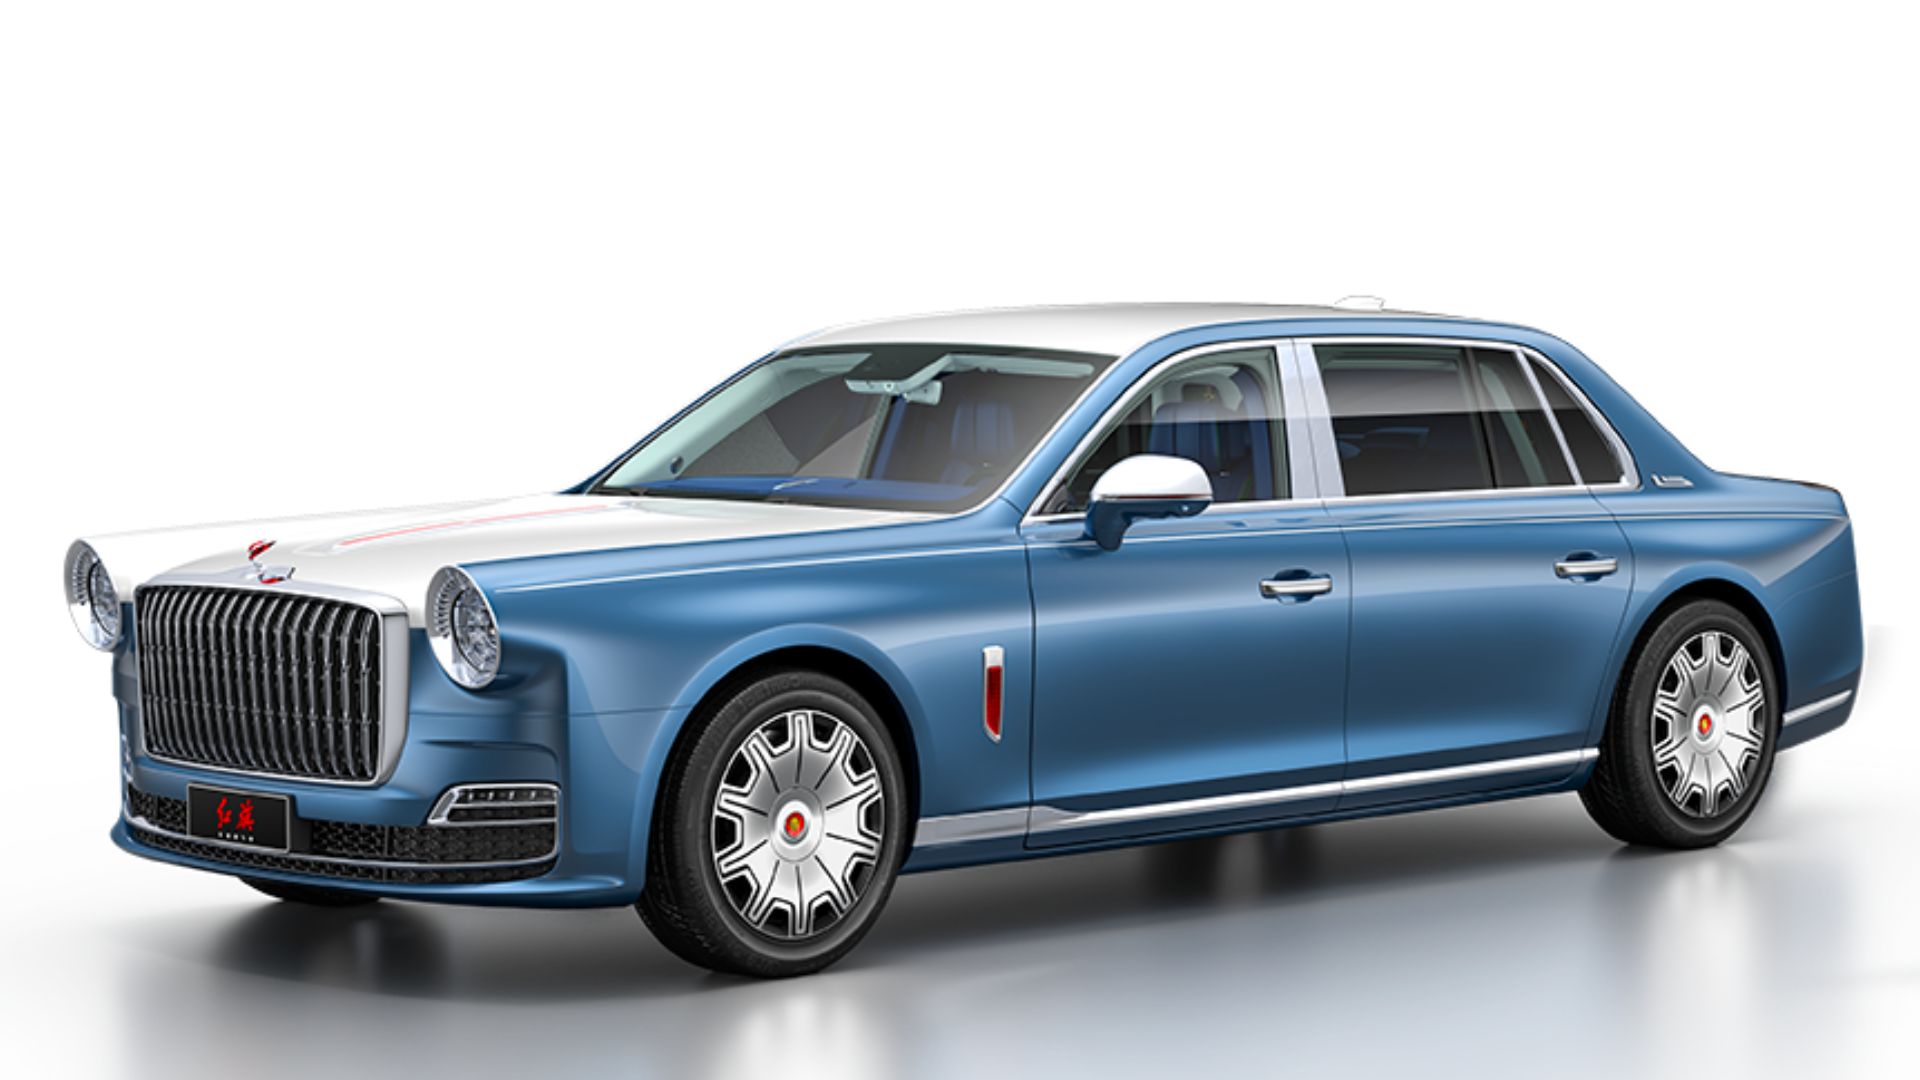 The new Hongqi L5 has been unveiled at Auto Shanghai 2023